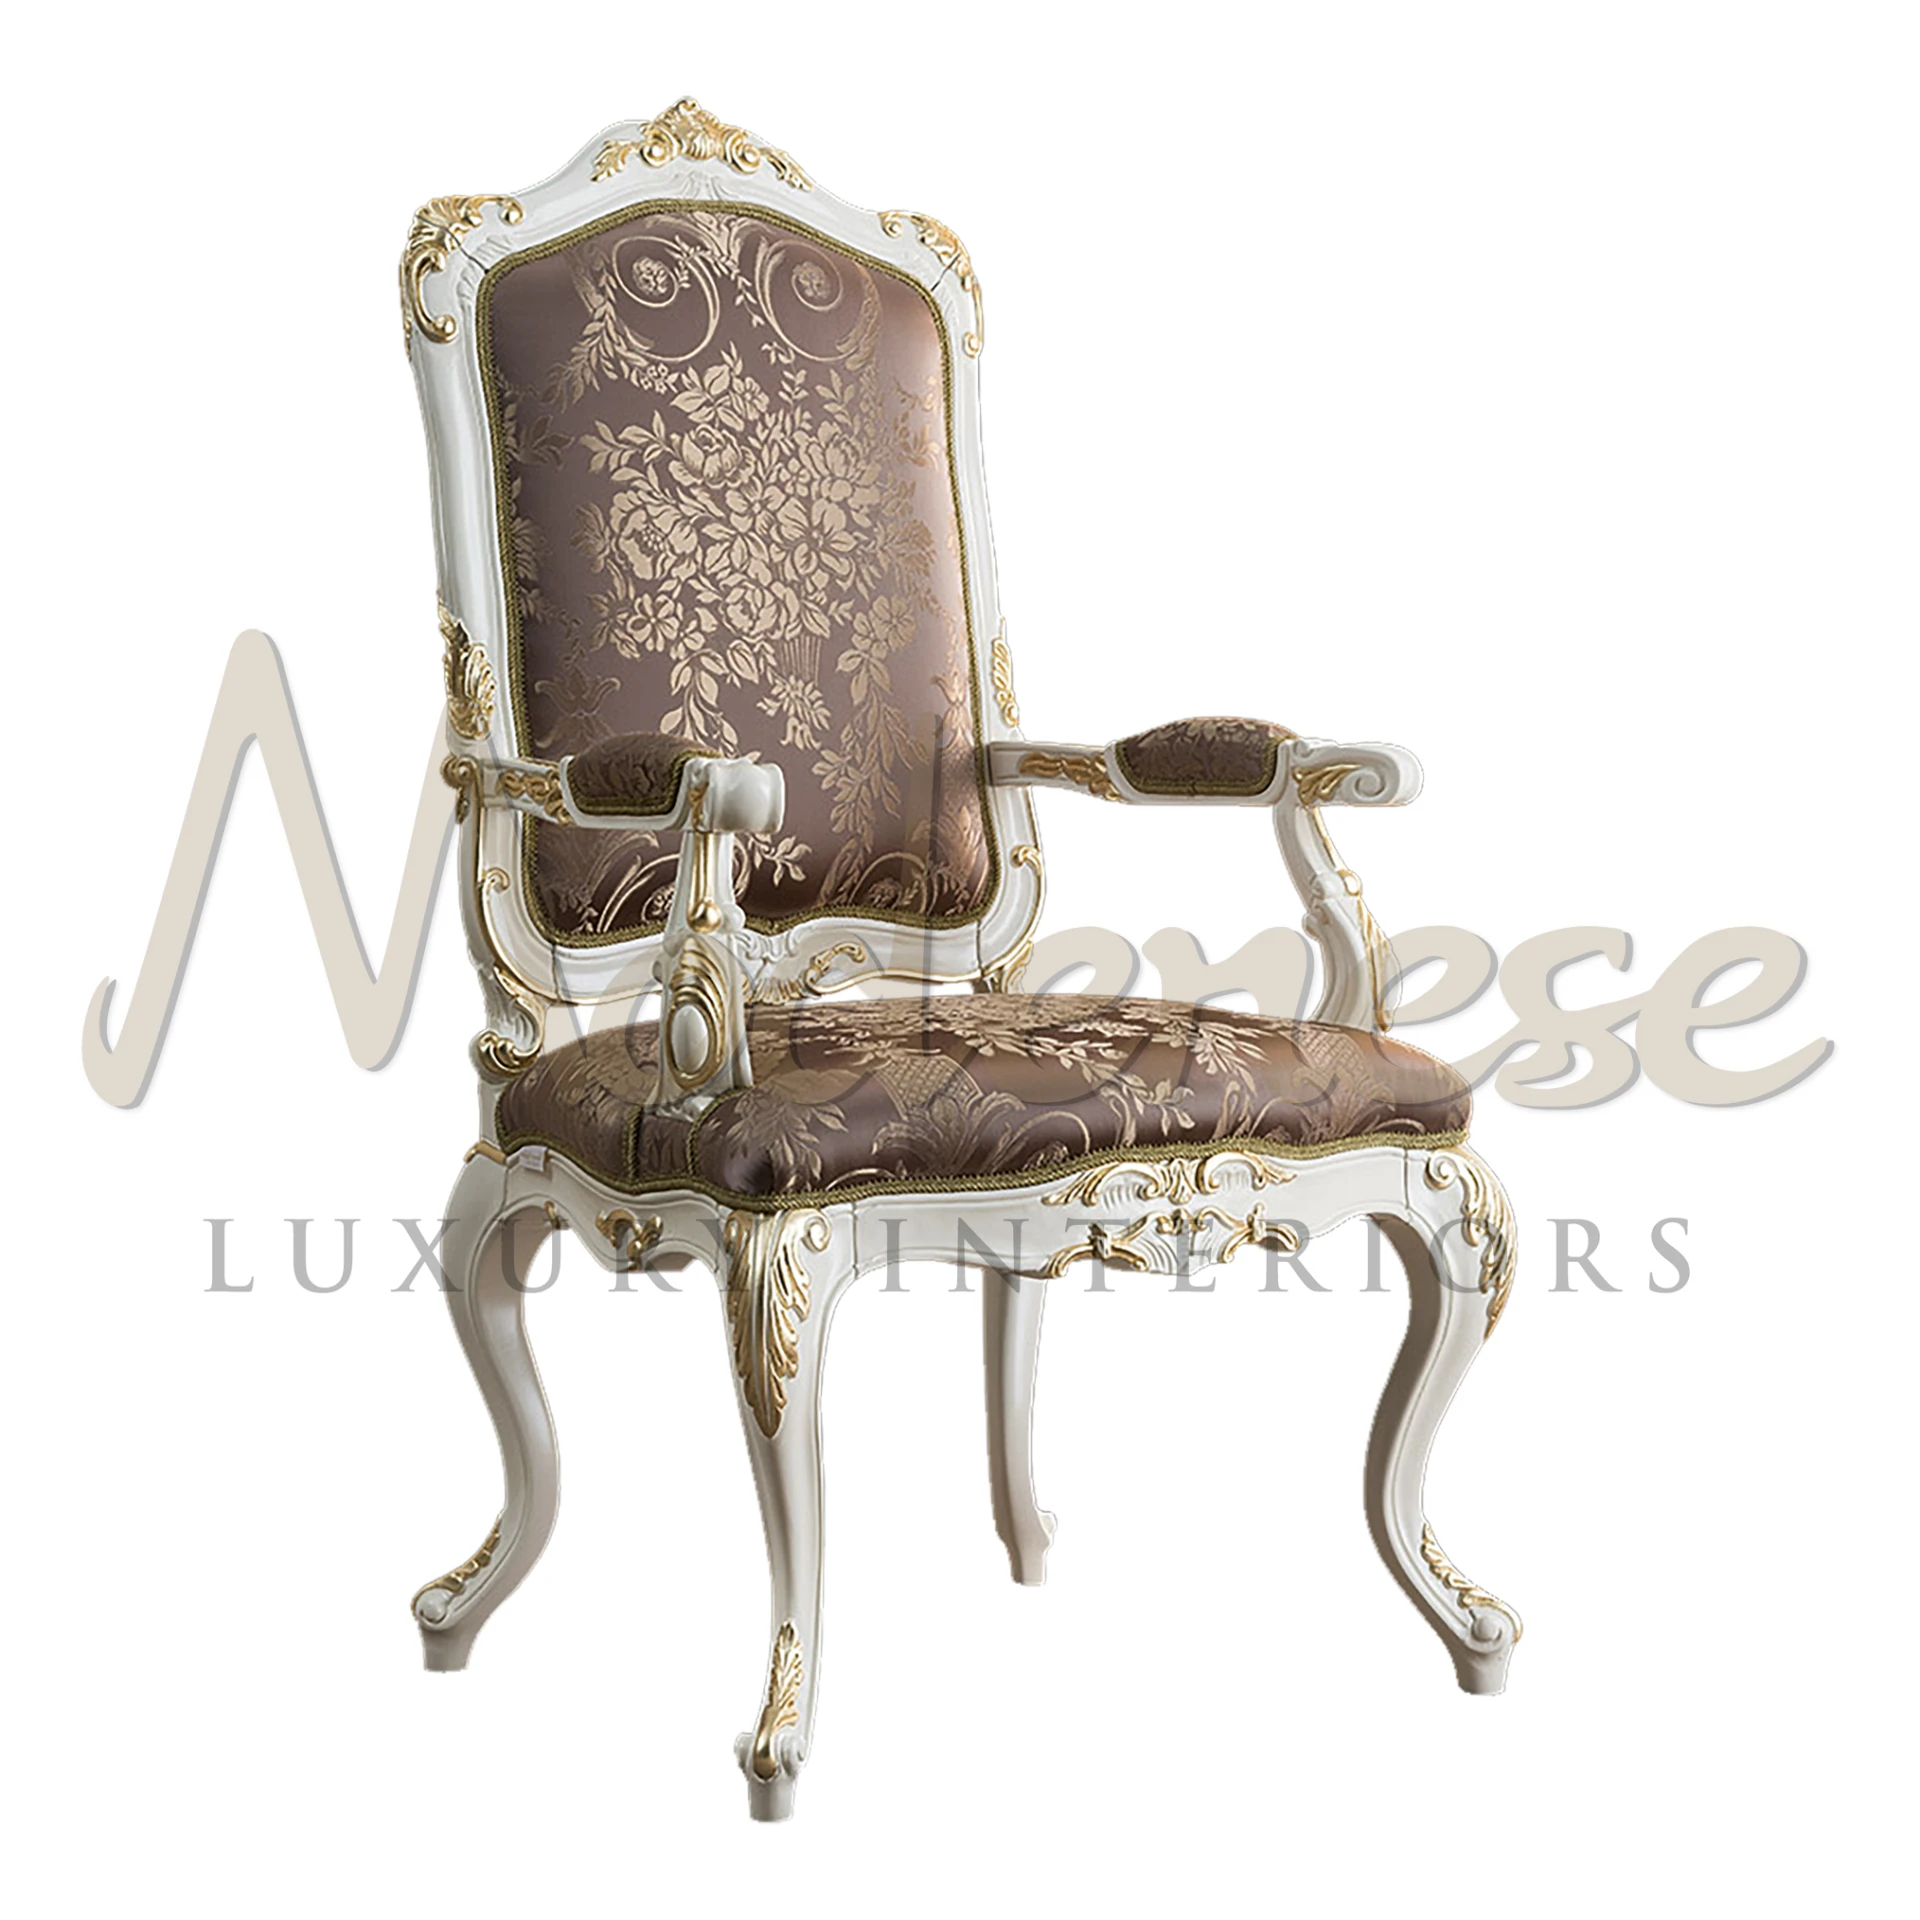 Modenese Furniture presents a majestic armchair with curved baroque legs and premium light purple upholstery, adorned with gold leaf applique details.